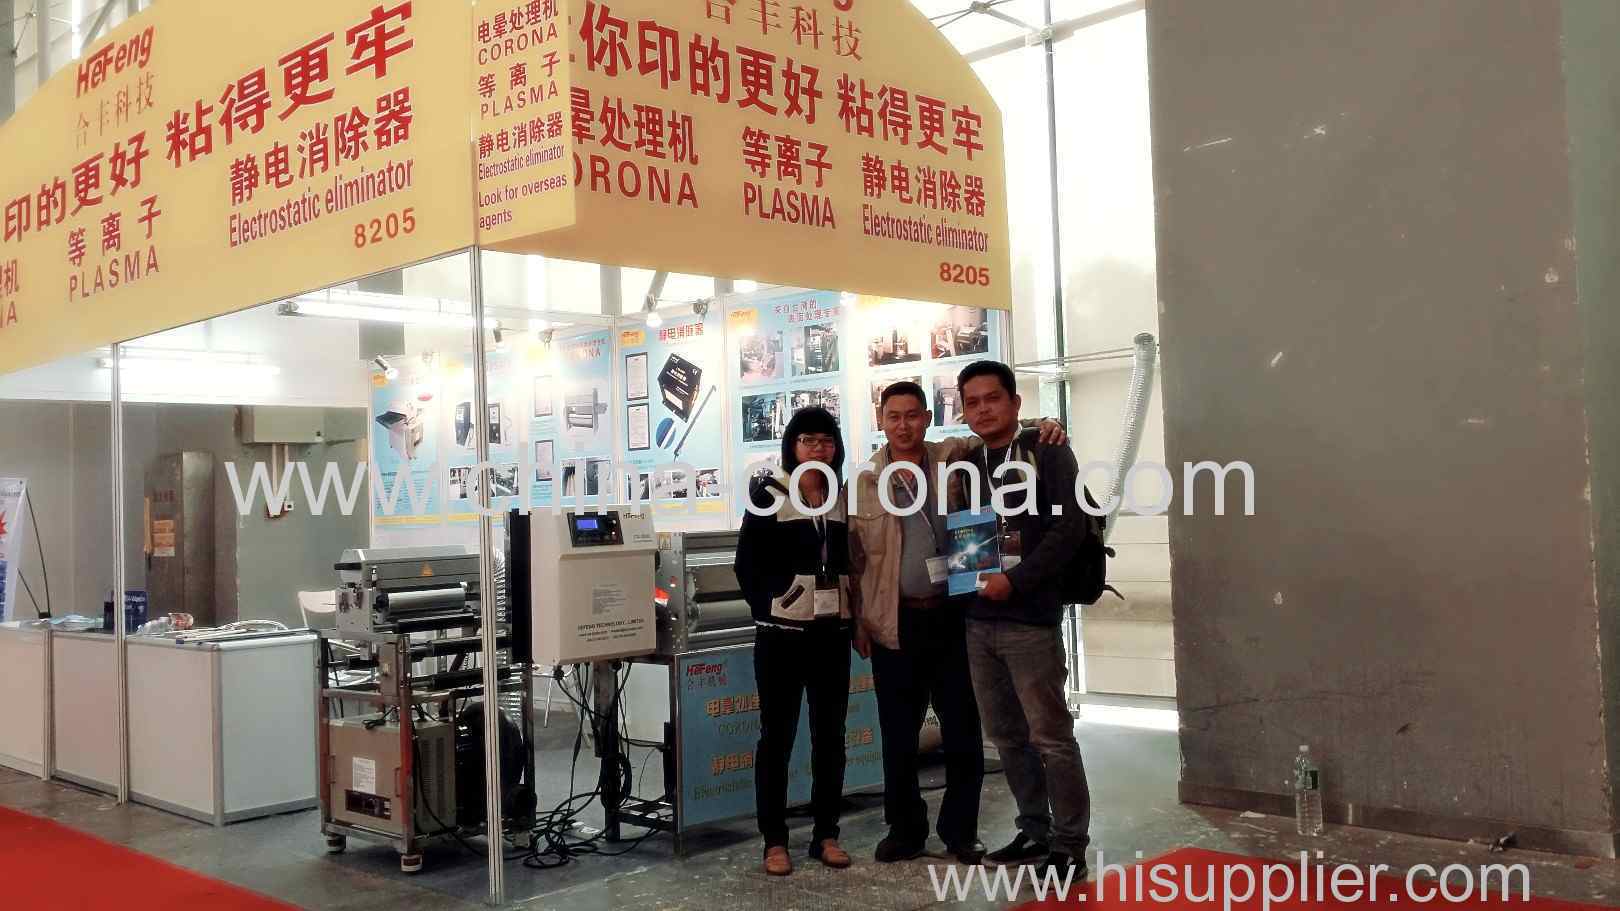 PRINTING SOUTH CHINA EXZIBITION